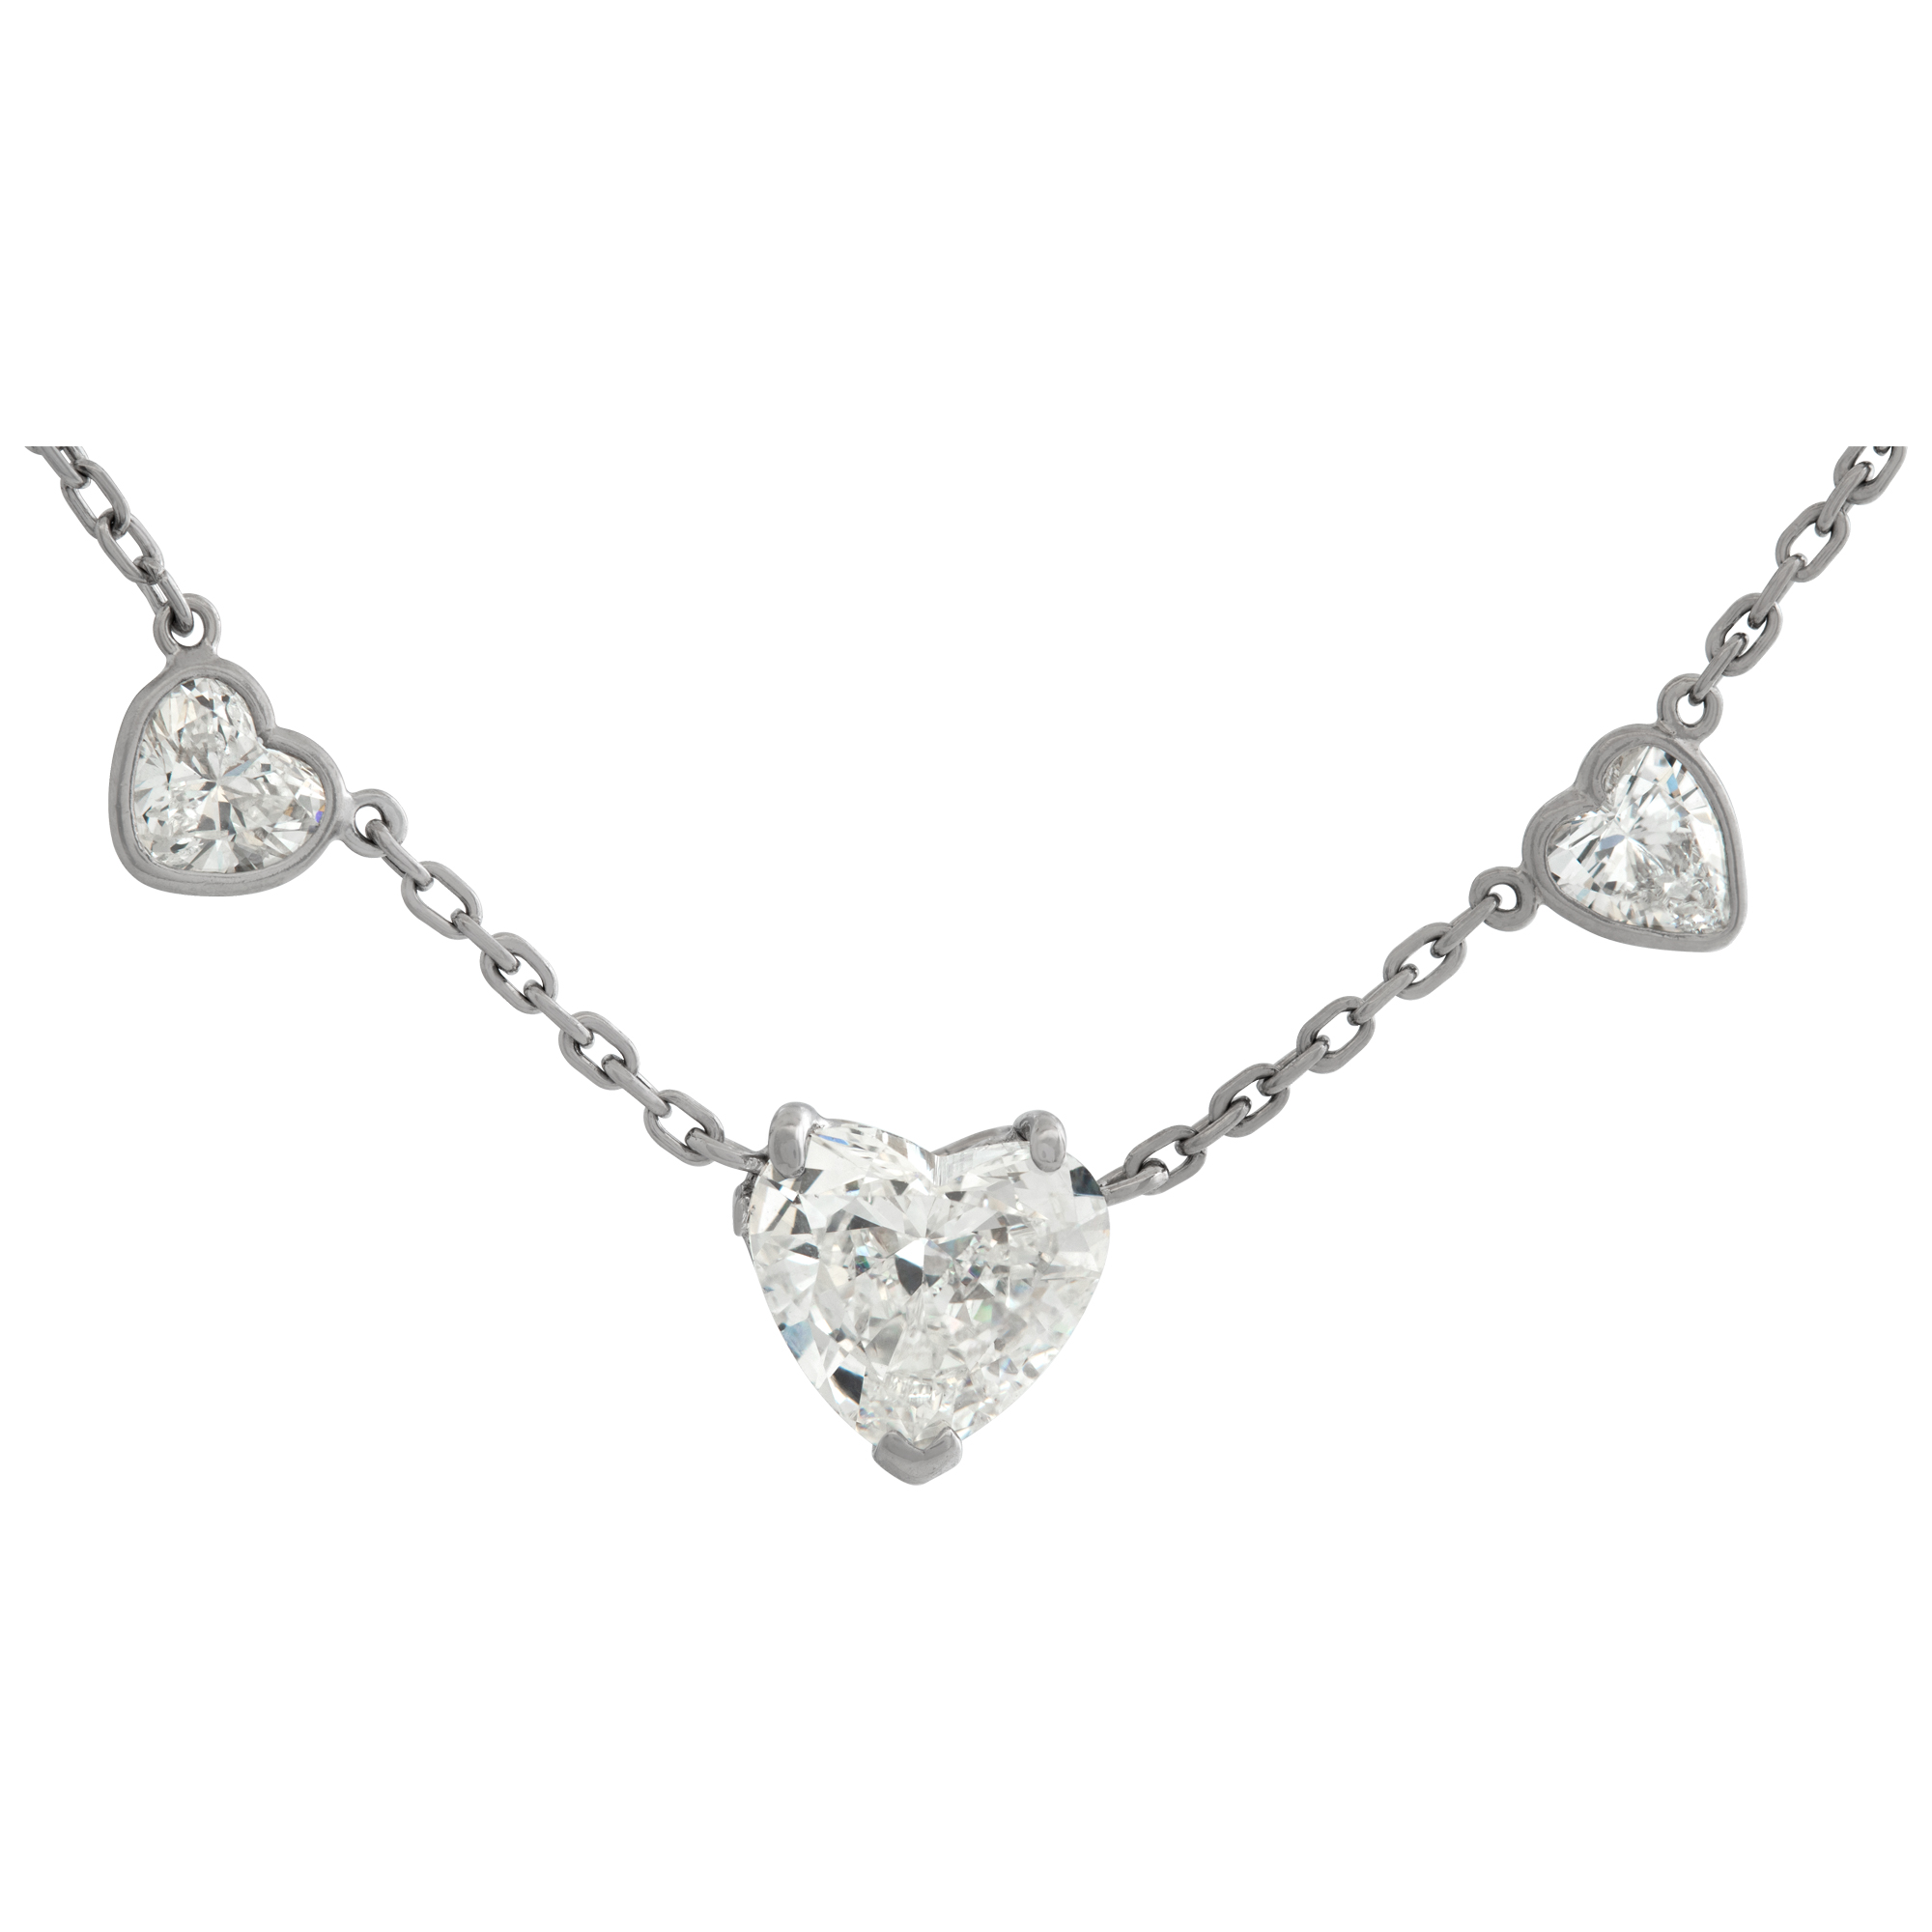 GIA certified heart shaped diamond 1.90 carat ( G color, SI1 clarity) necklace on 14k white gold cha